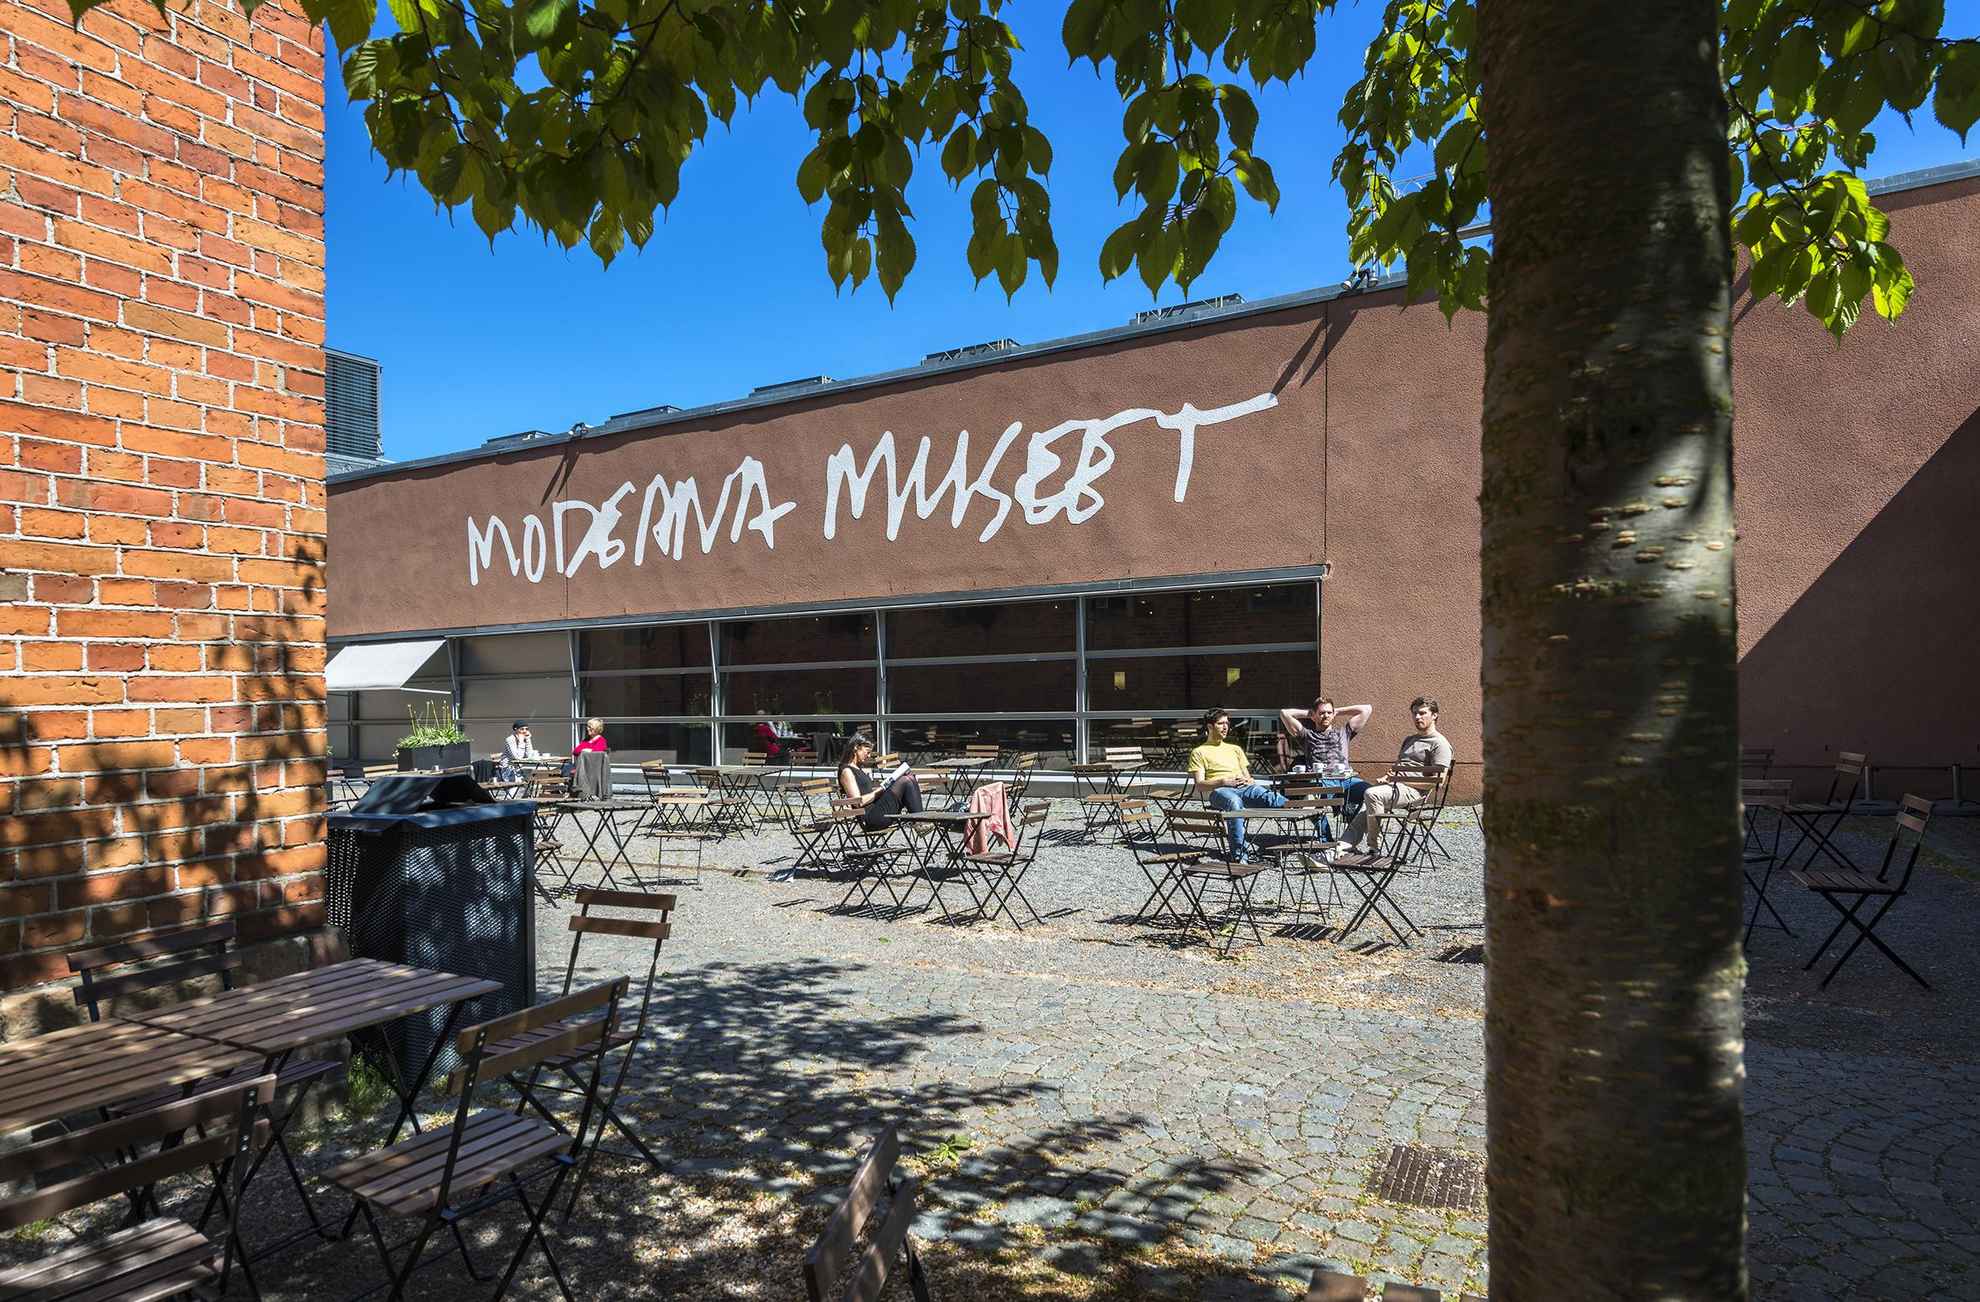 A courtyard with people sitting by café tables, outside a building with the text "Moderna museet".